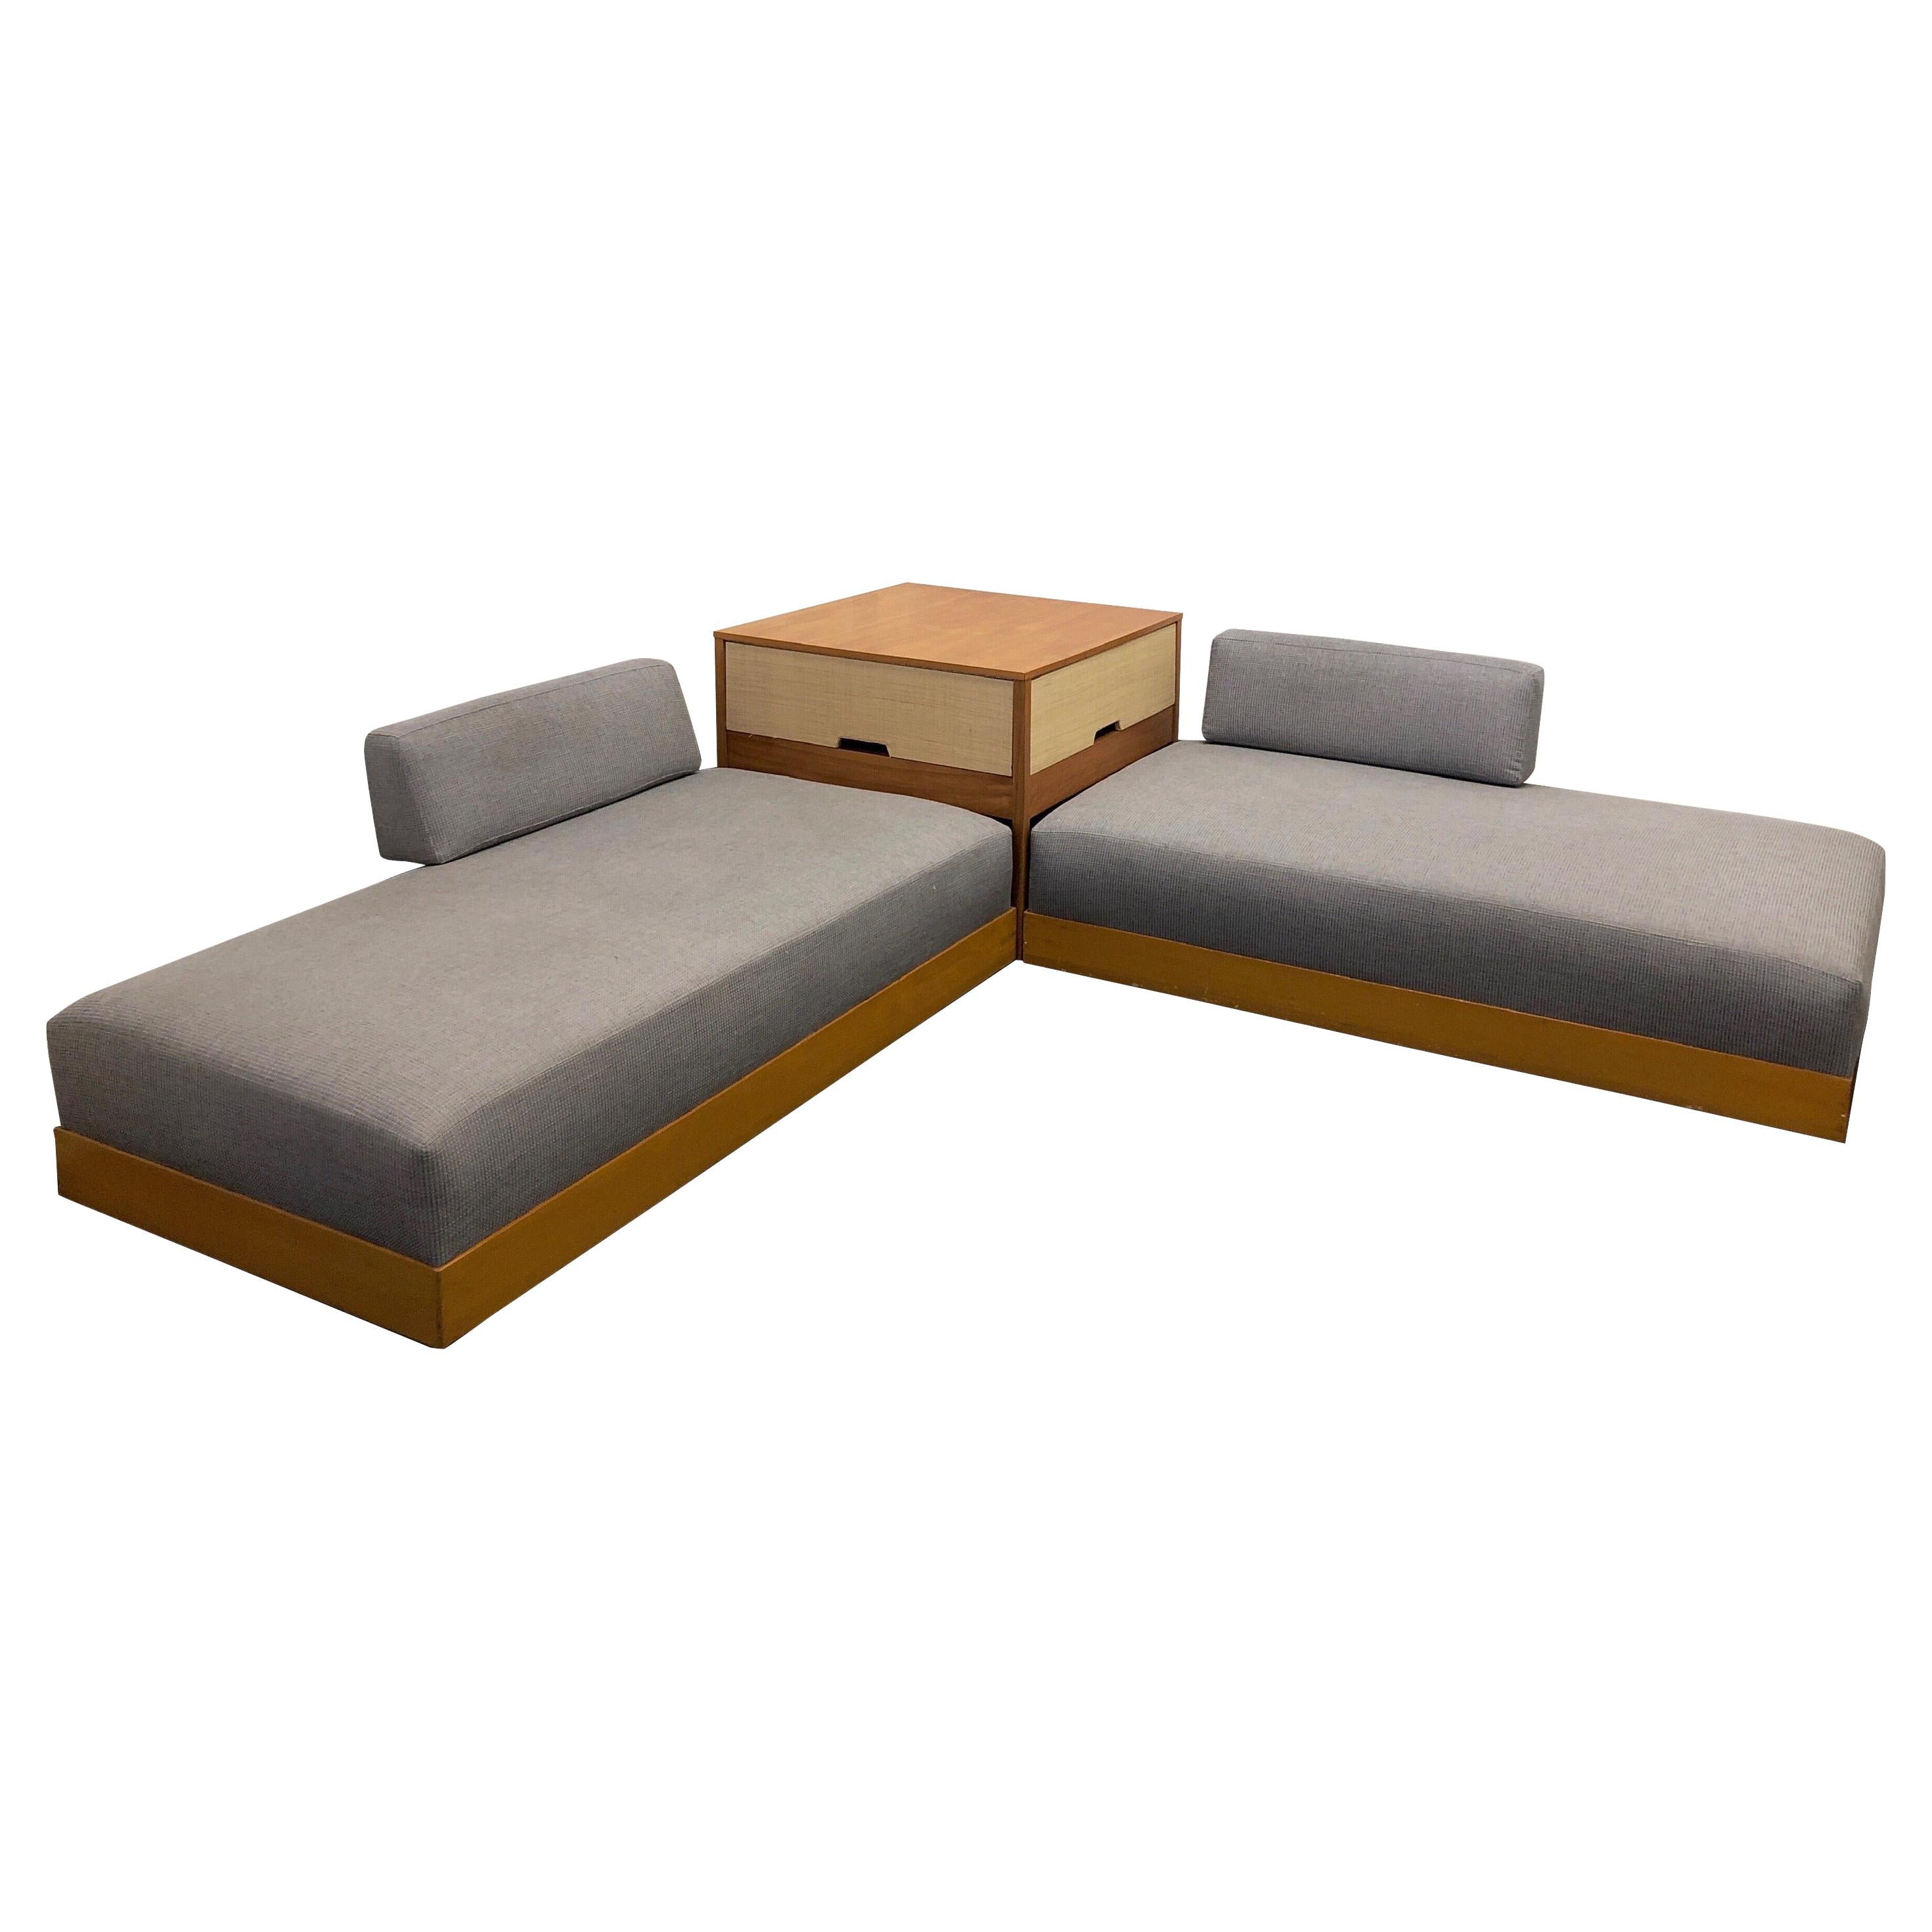 Blonde Wood and Grasscloth Daybeds by Herman Miller